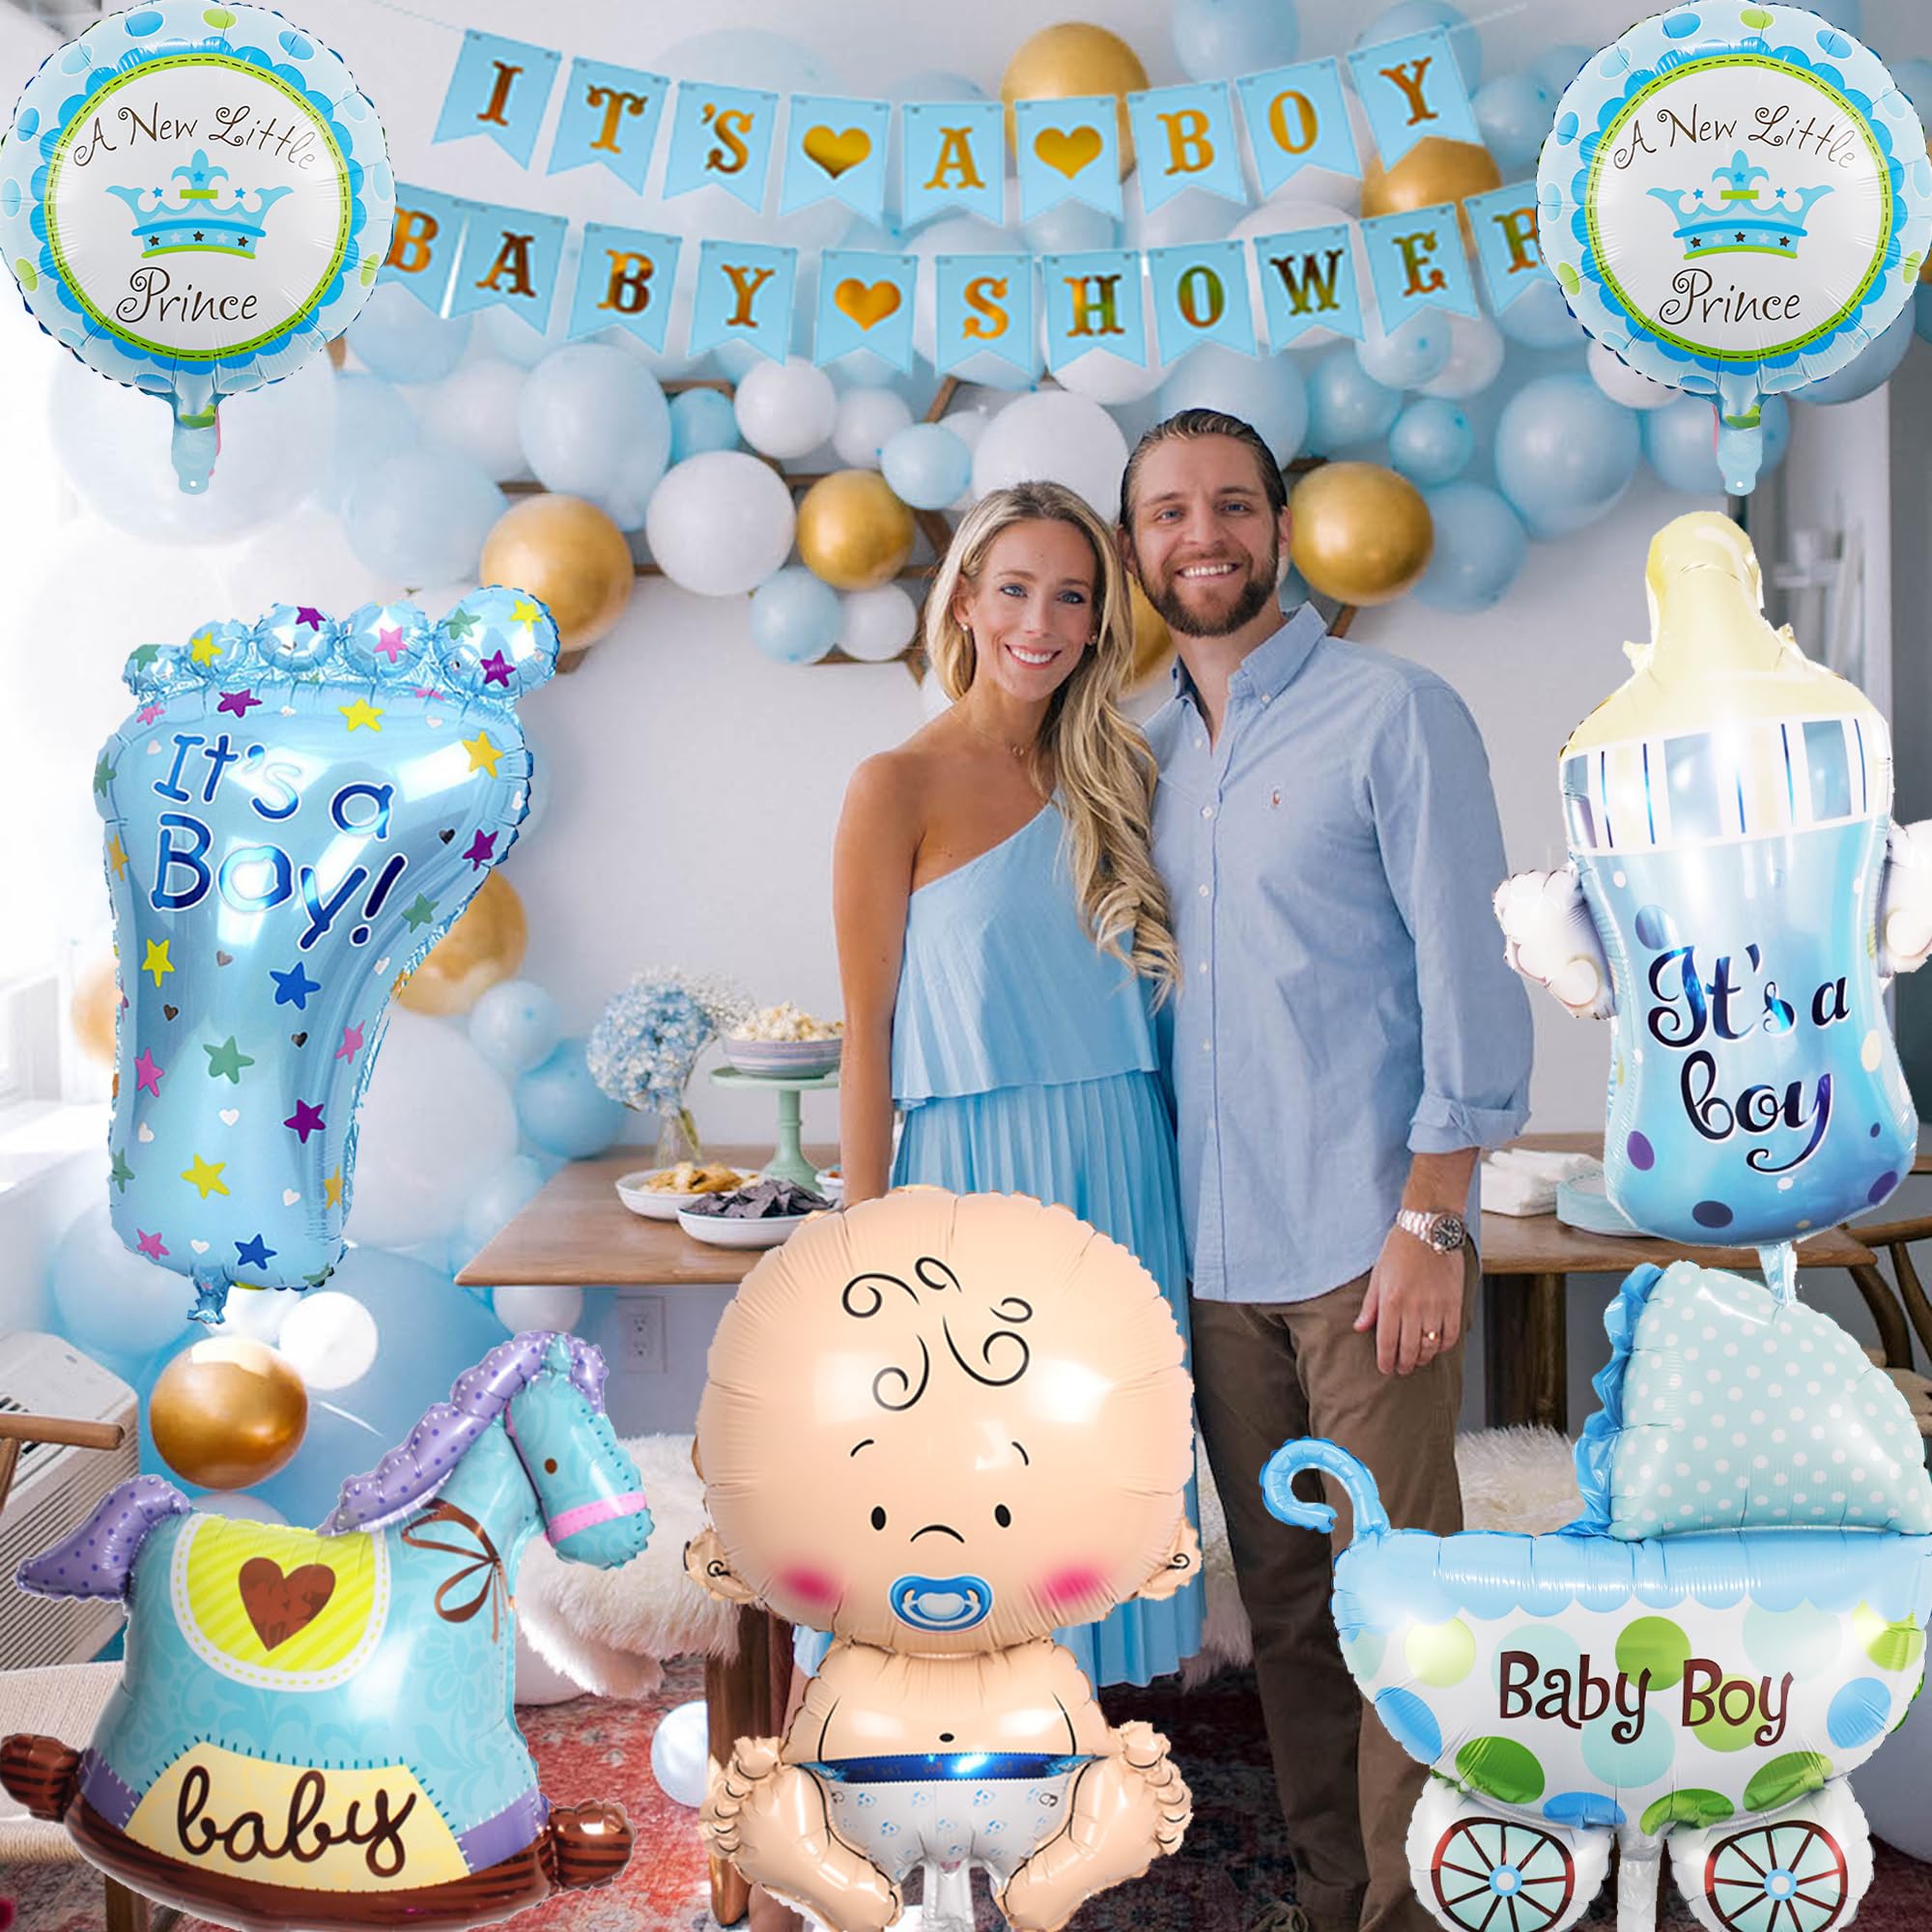 Baby Shower Decorations Boy - Baby Shower Balloons, It's a Boy Banner, Blue Baby Balloons, Photo Props, Baby Boy Shower Decorations - Gender Reveal Supplies